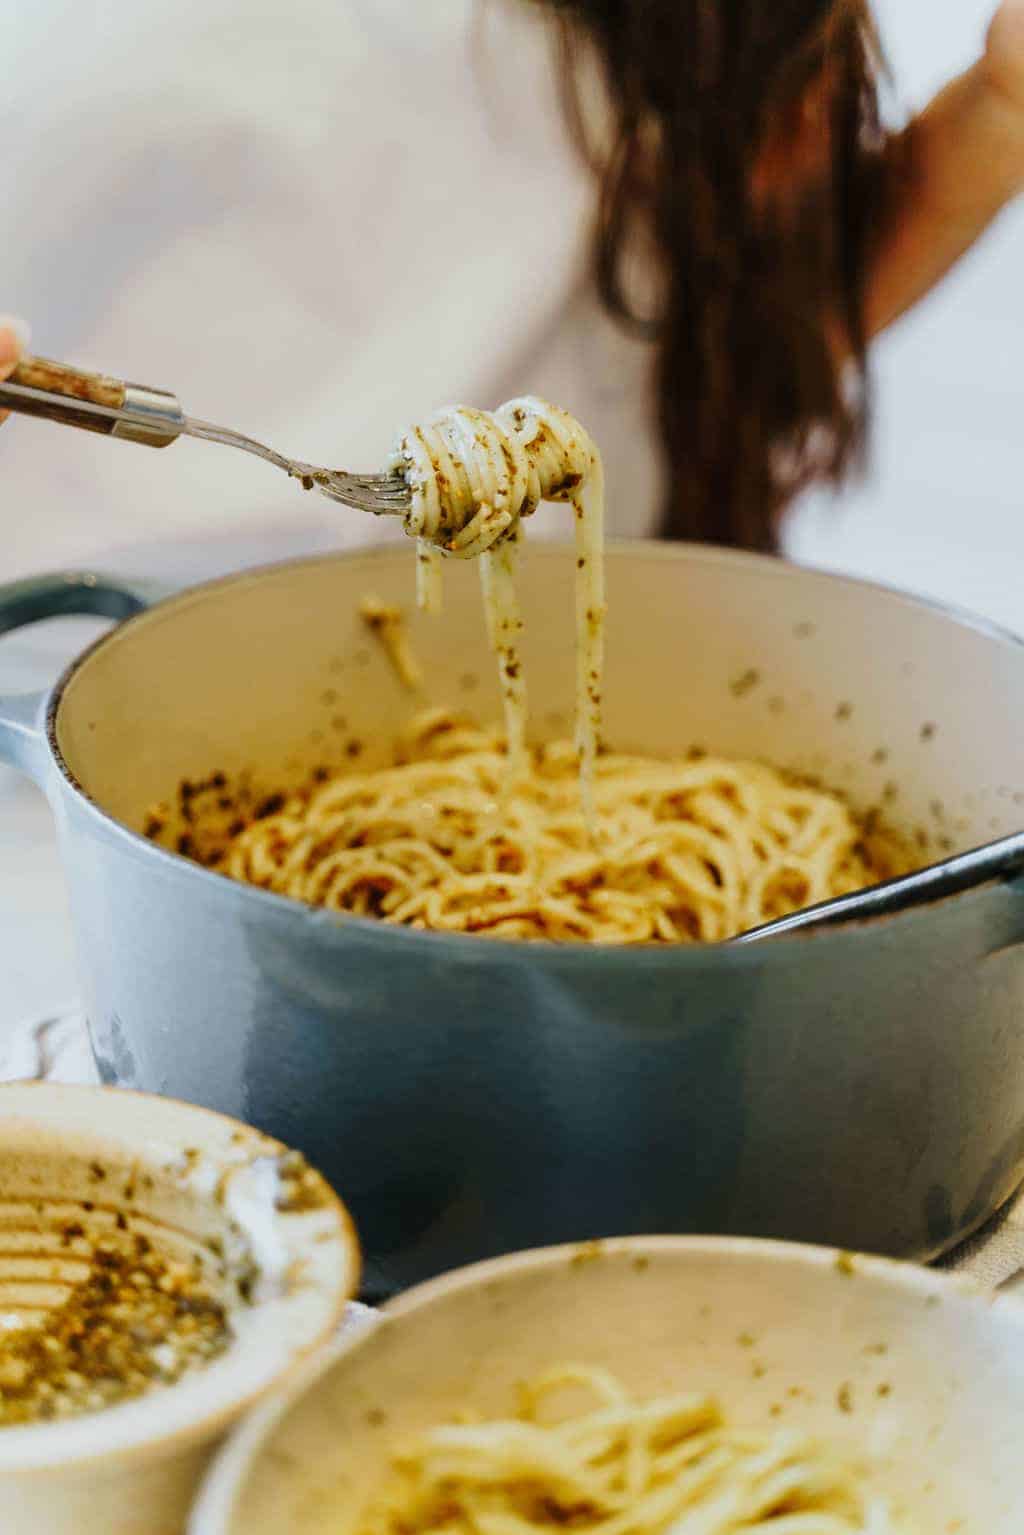 Twirling spaghetti noodles in a large pot with pesto sauce.